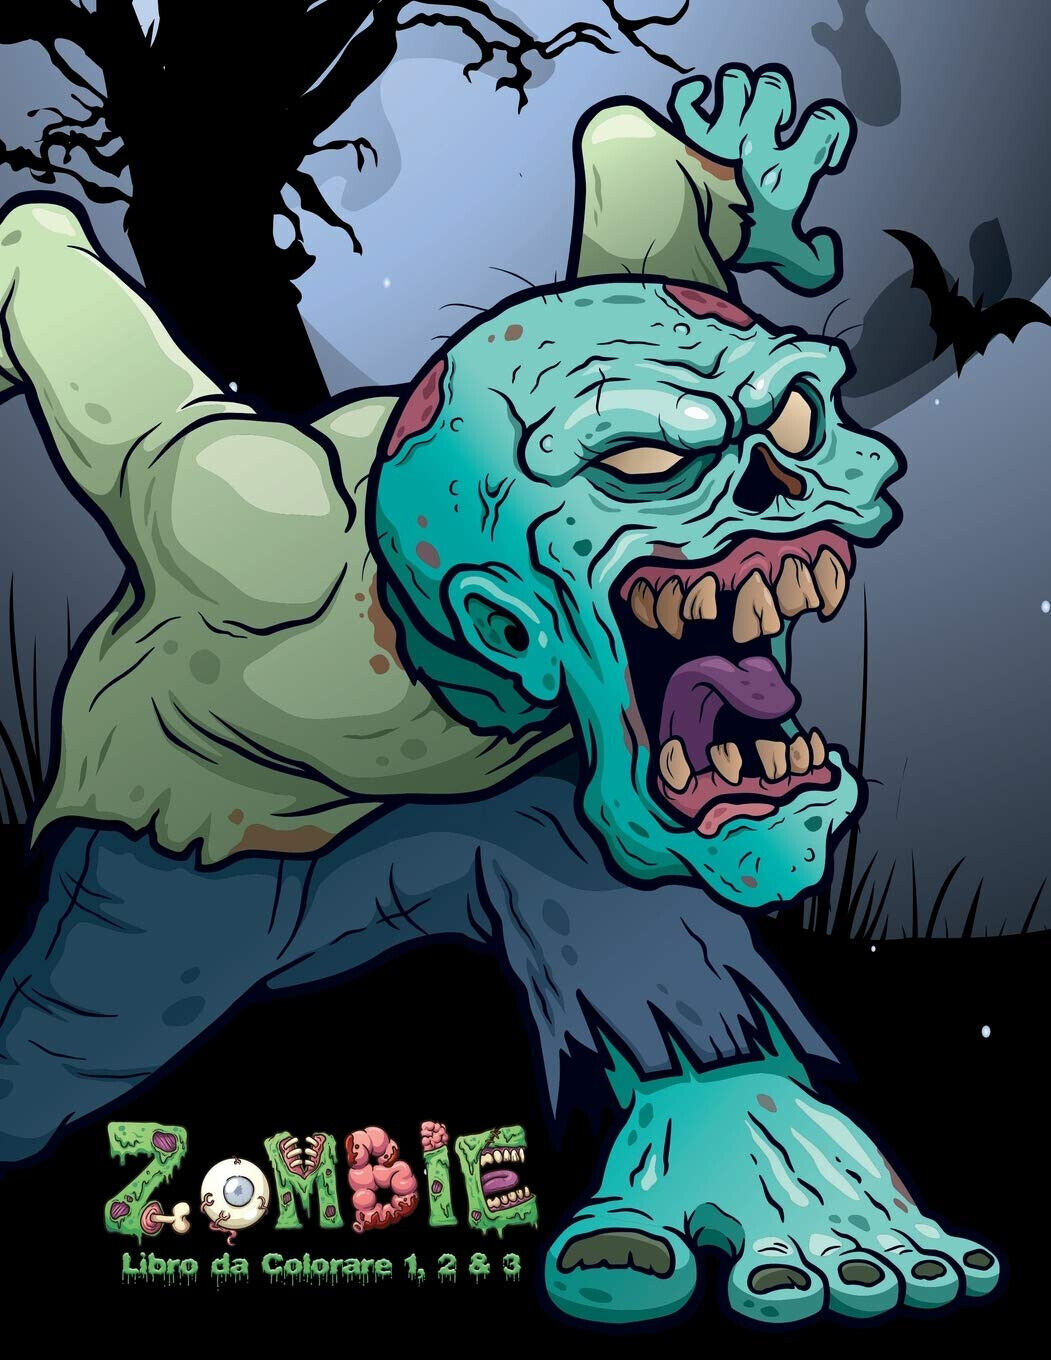 ZOMBIE LIBRO DA COLORARE 1, 2 3 - NICK SNELS -  Independently published, 2019